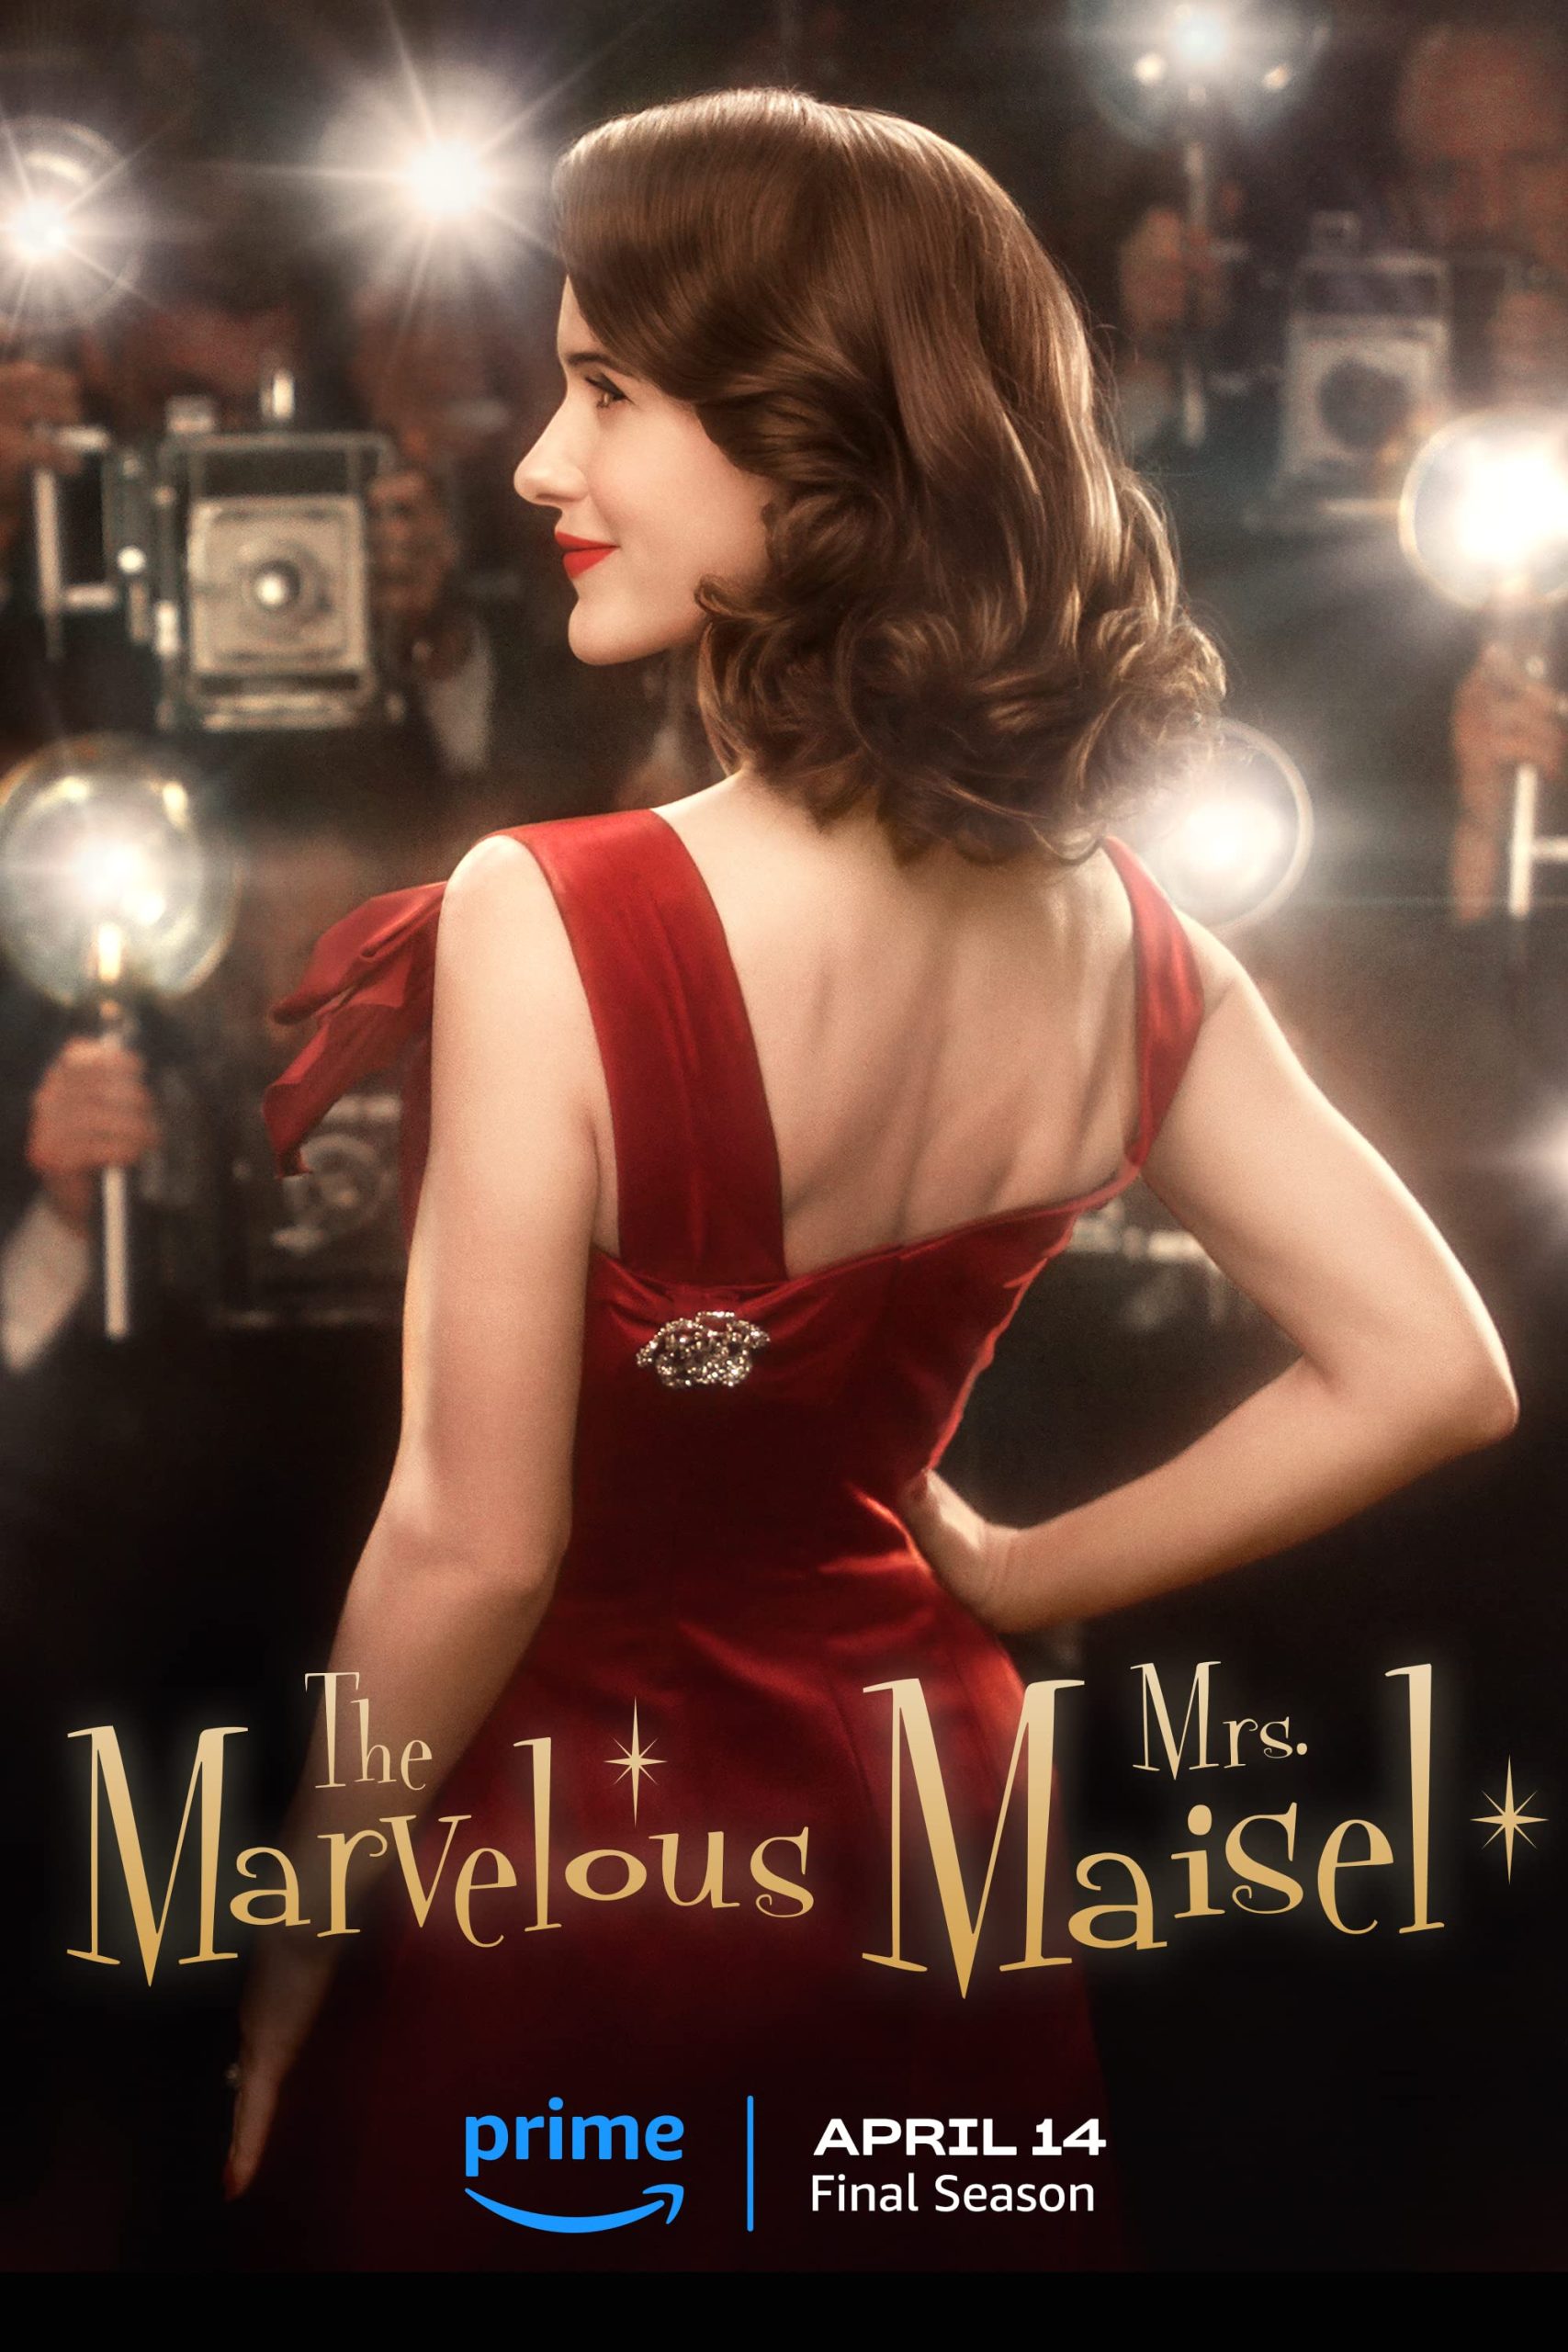 Download The Marvelous Mrs. Maisel (Season 1-5) (Season 5 ADDED) Complete [Prime Video] Dual Audio {Hindi-English} WEB Series 1080p | 720p | 480p WEB-DL download